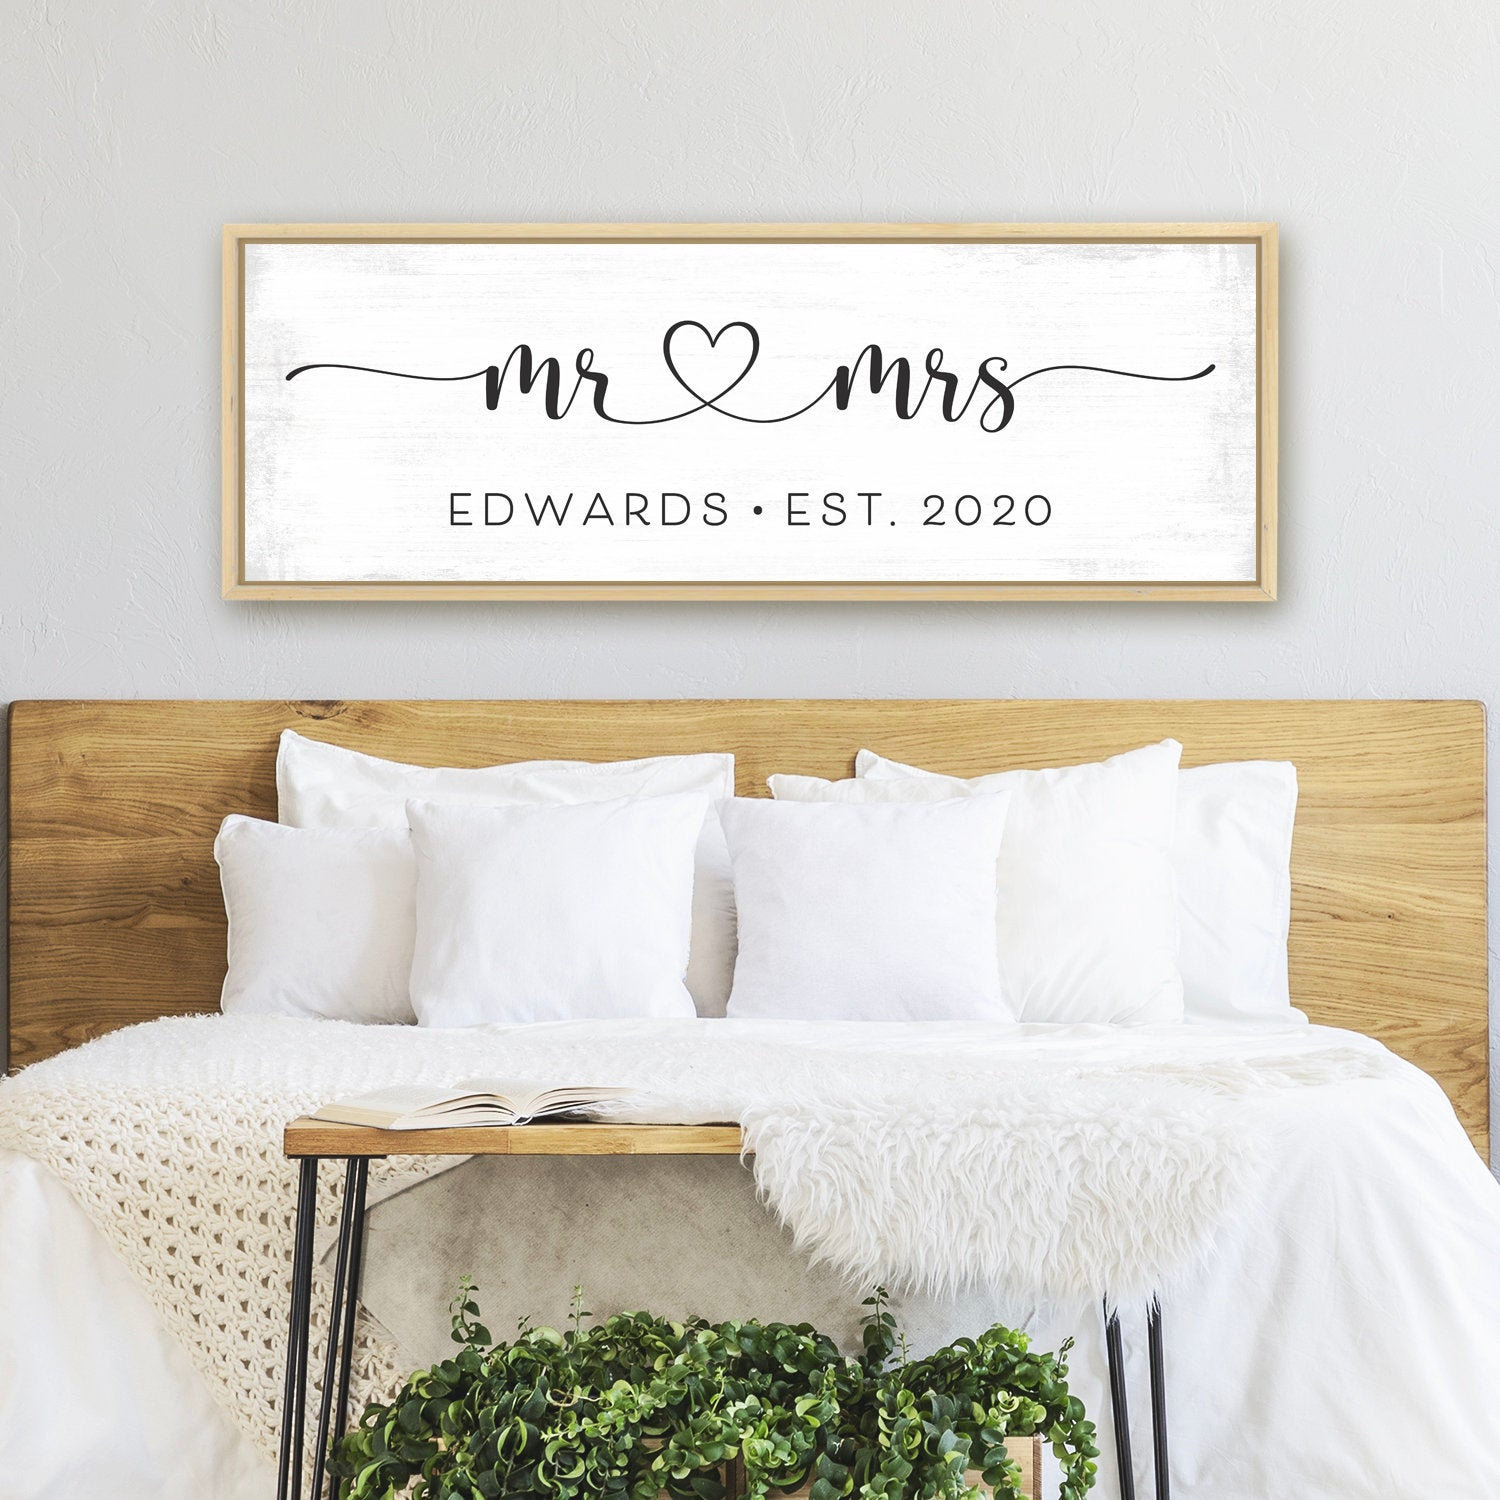 Custom Mr & Mrs Sign With Last Name For His & Hers Canvas Wall Art, Newlywed Marriage Est Date Gifts, Master Bedroom Above Bed Decor